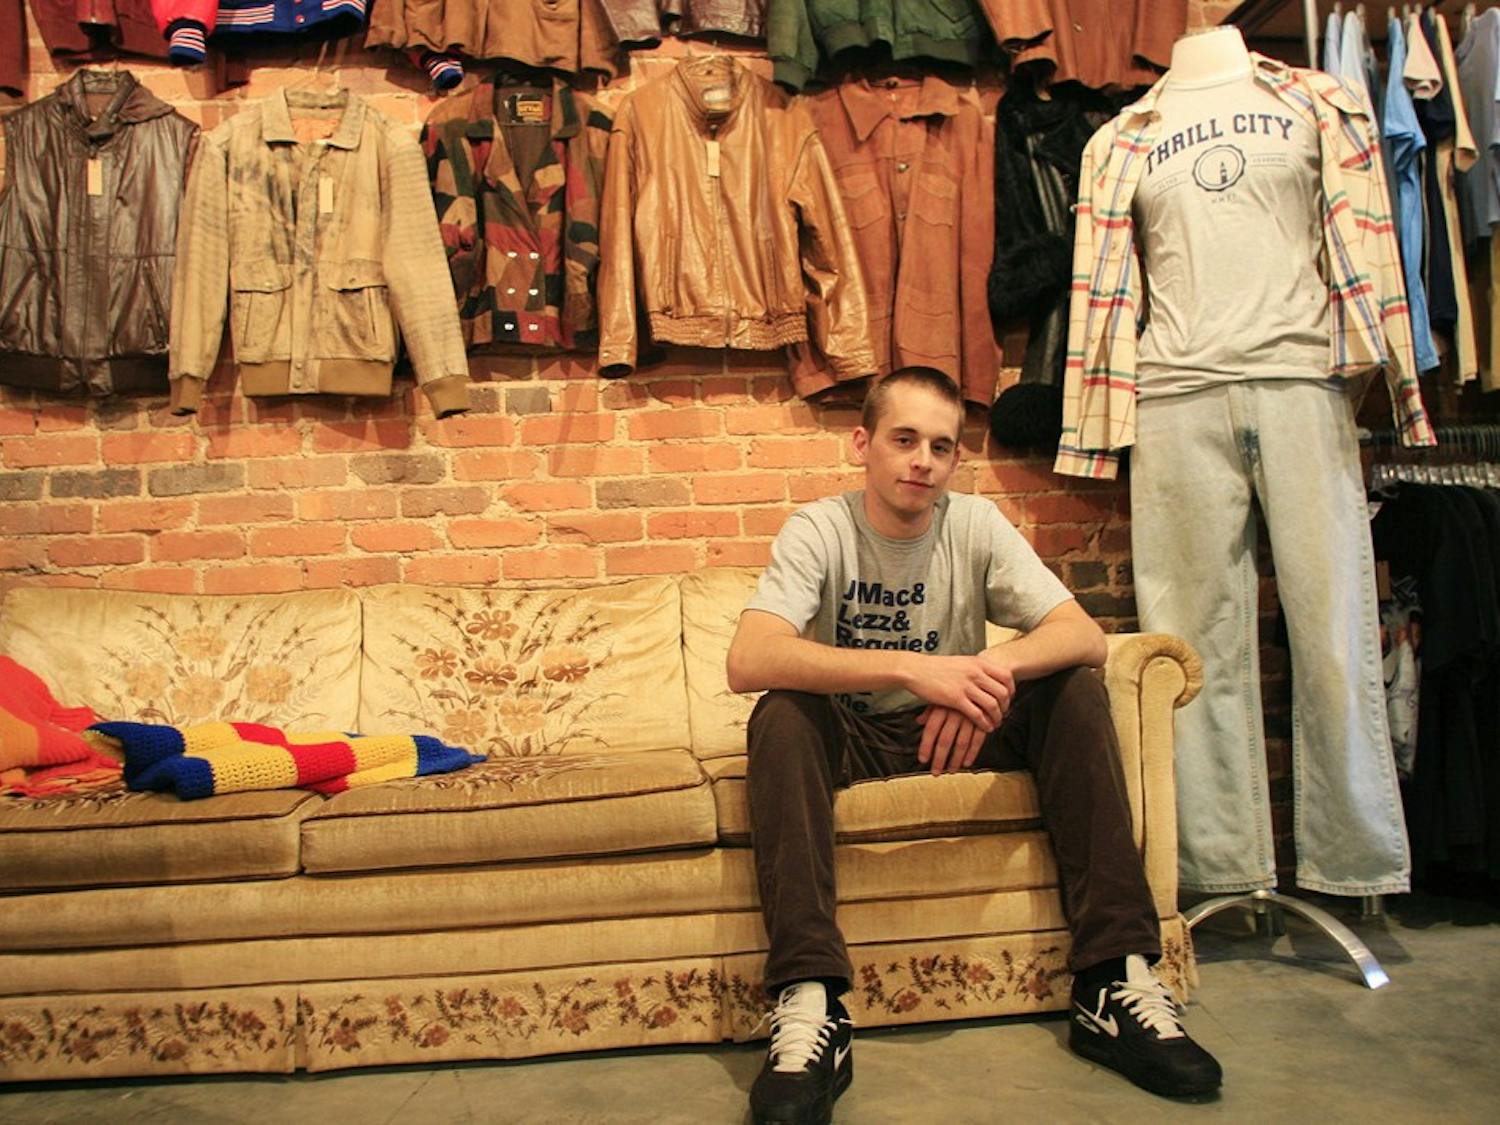 Ryan Cocca, a photojournalism major at UNC, founded the clothing brand, Thrill City. 